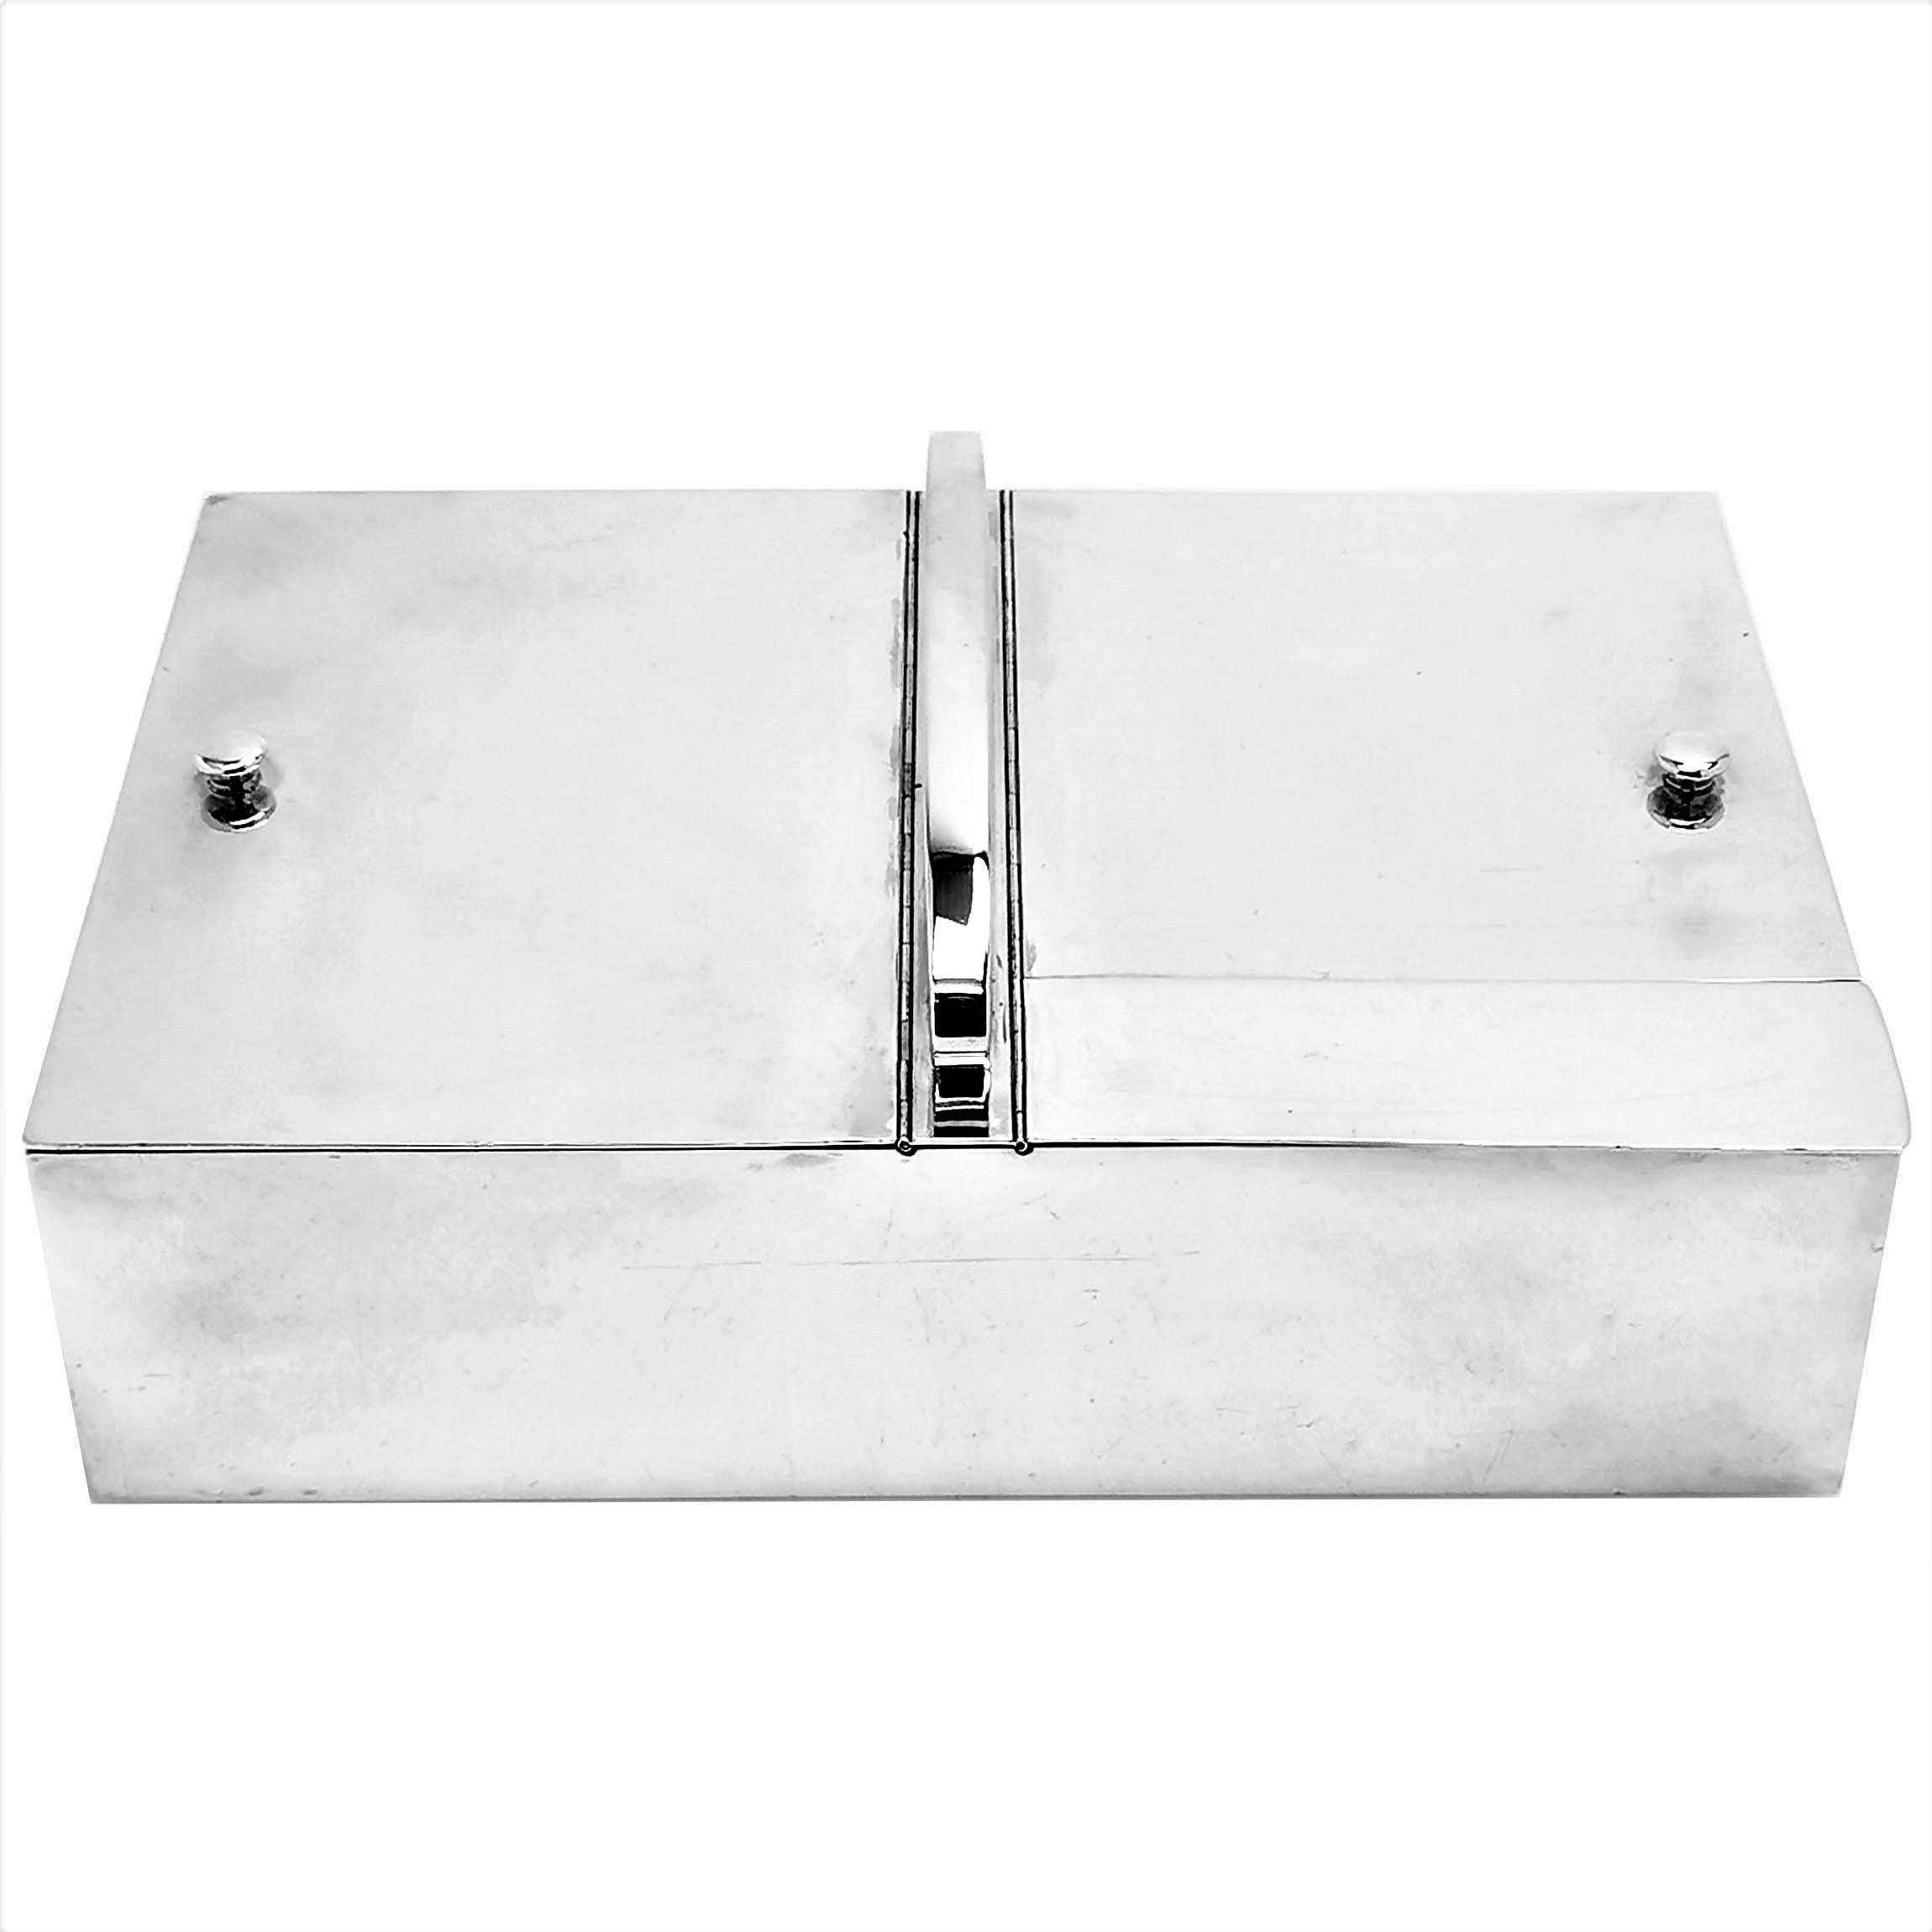 A magnificent French Antique silver Smokers Companion with two large compartments for cigars / cigarettes and one smaller compartment for matches and a match striker. The Smoking Box is of substantial size and weight and has a handle on the top for